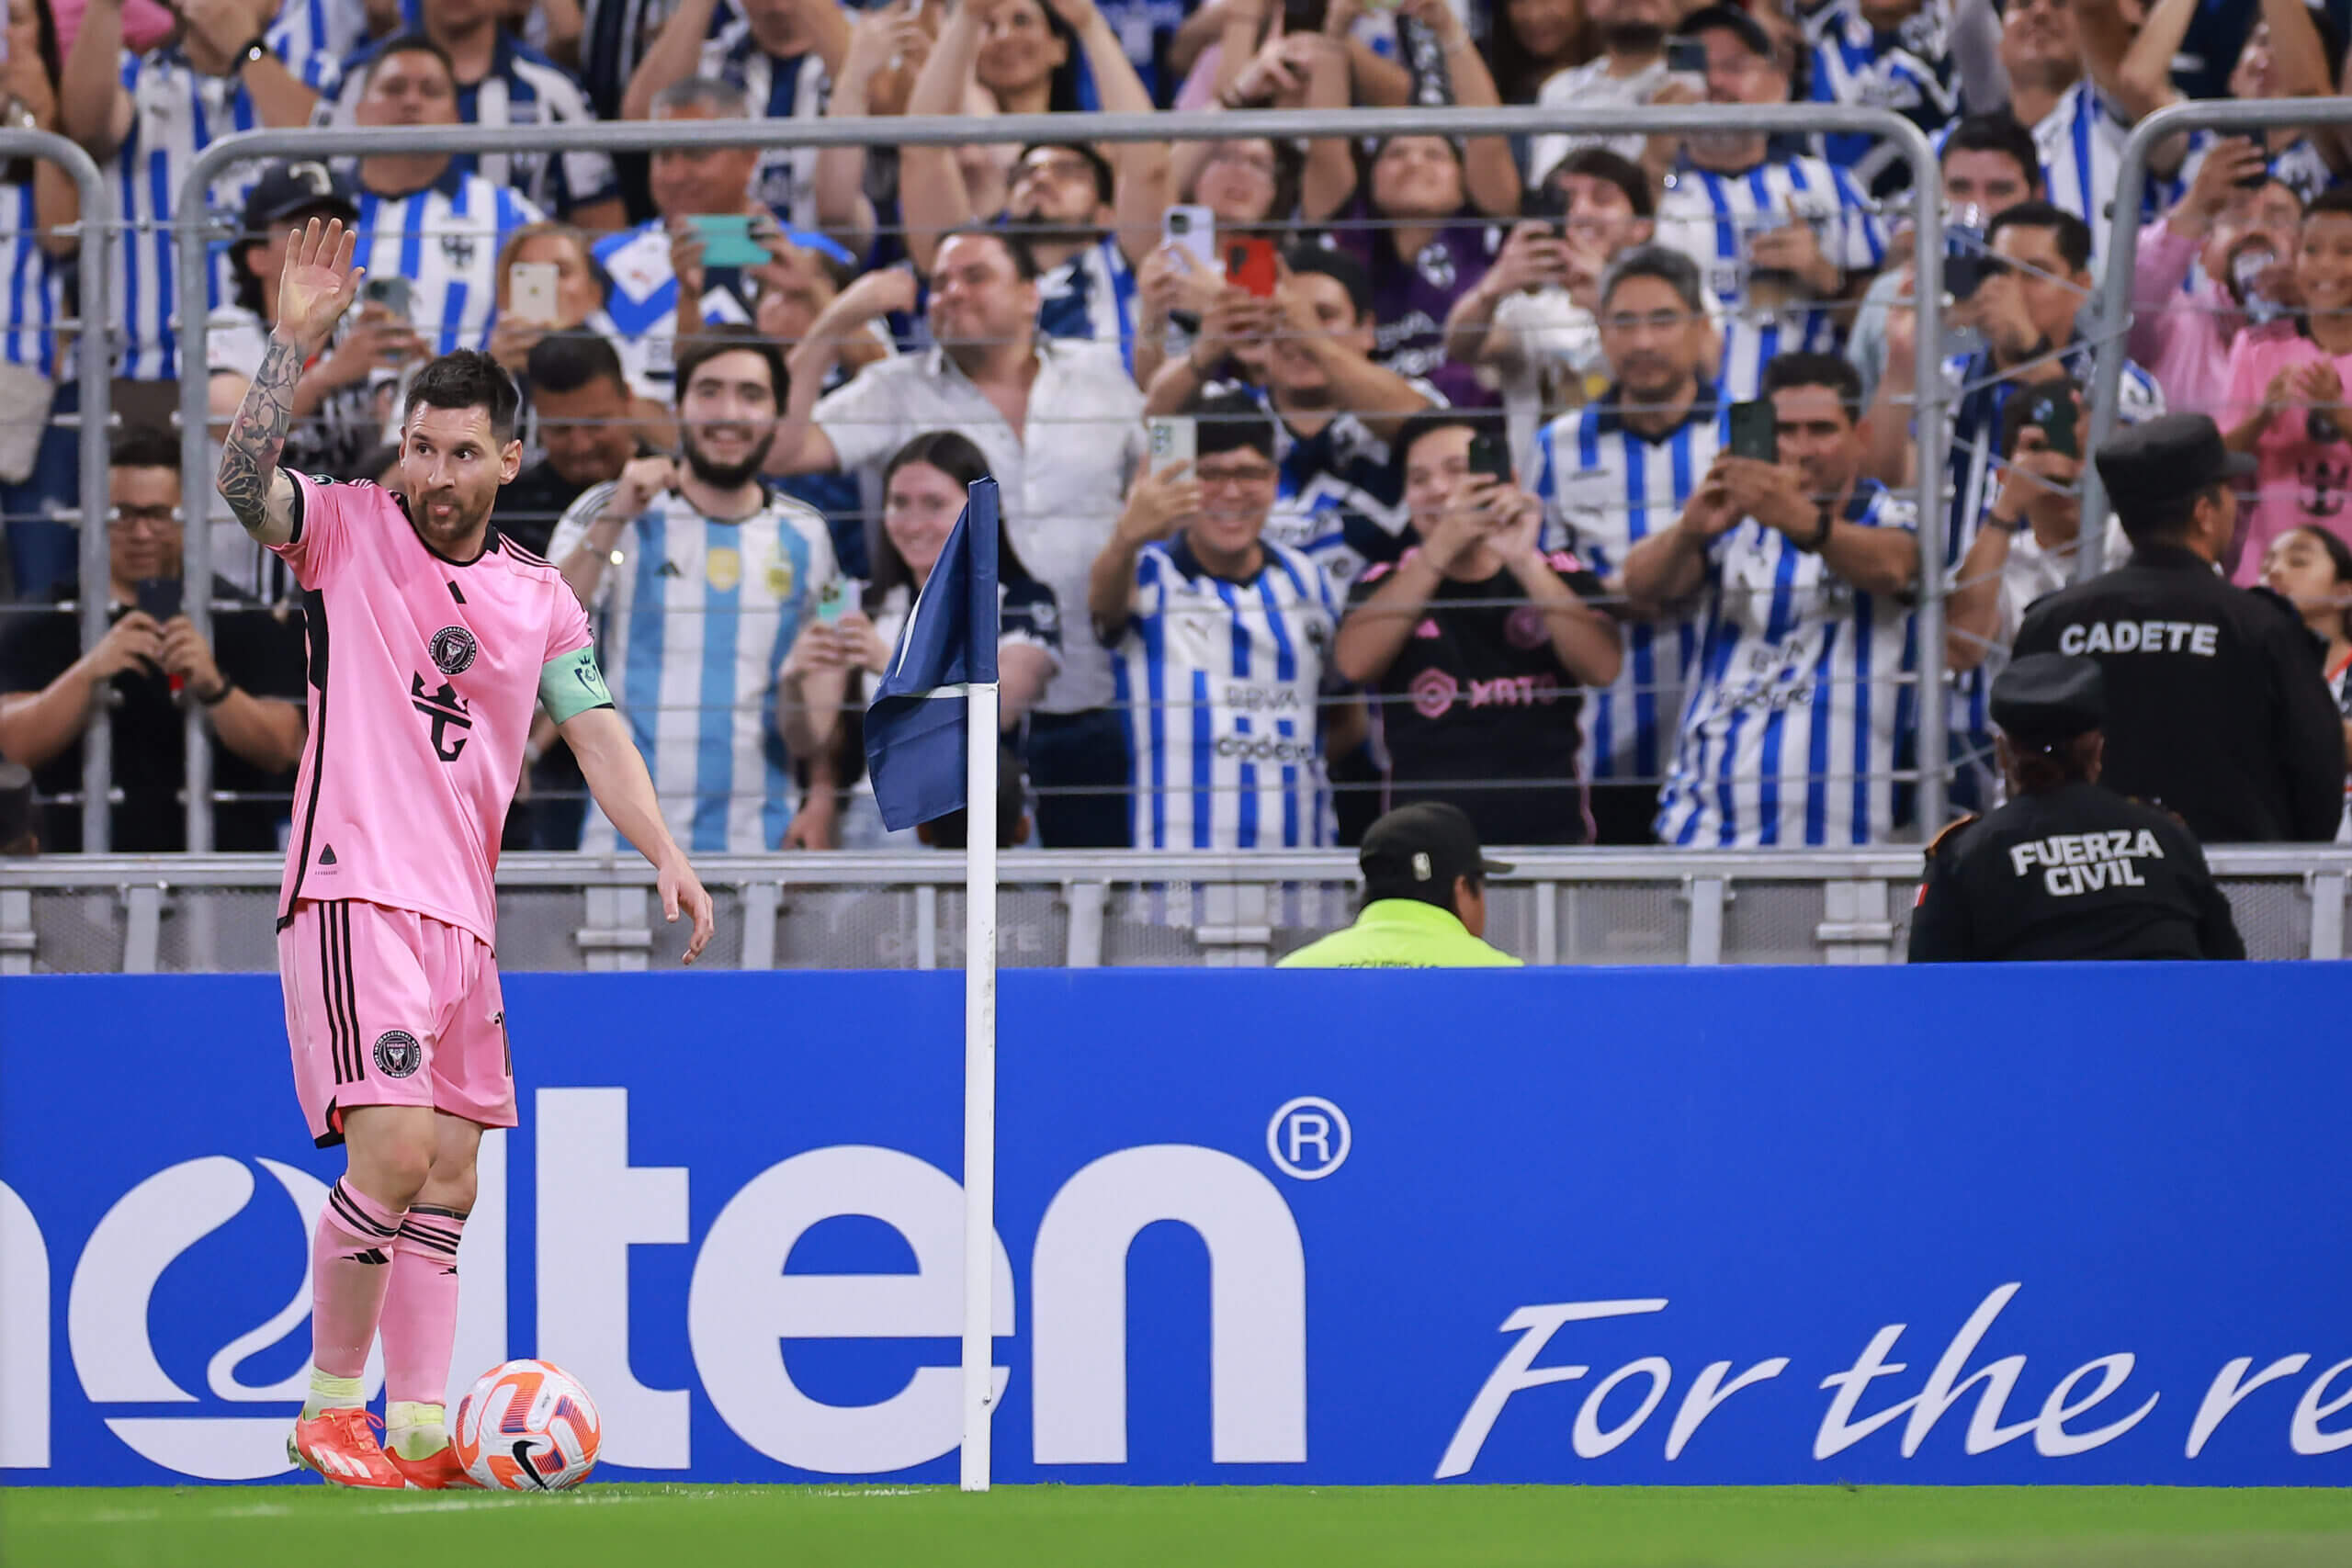 Lionel Messi’s Jersey Disrespected by Monterrey Fans, Sparks Outrage Among Football Community